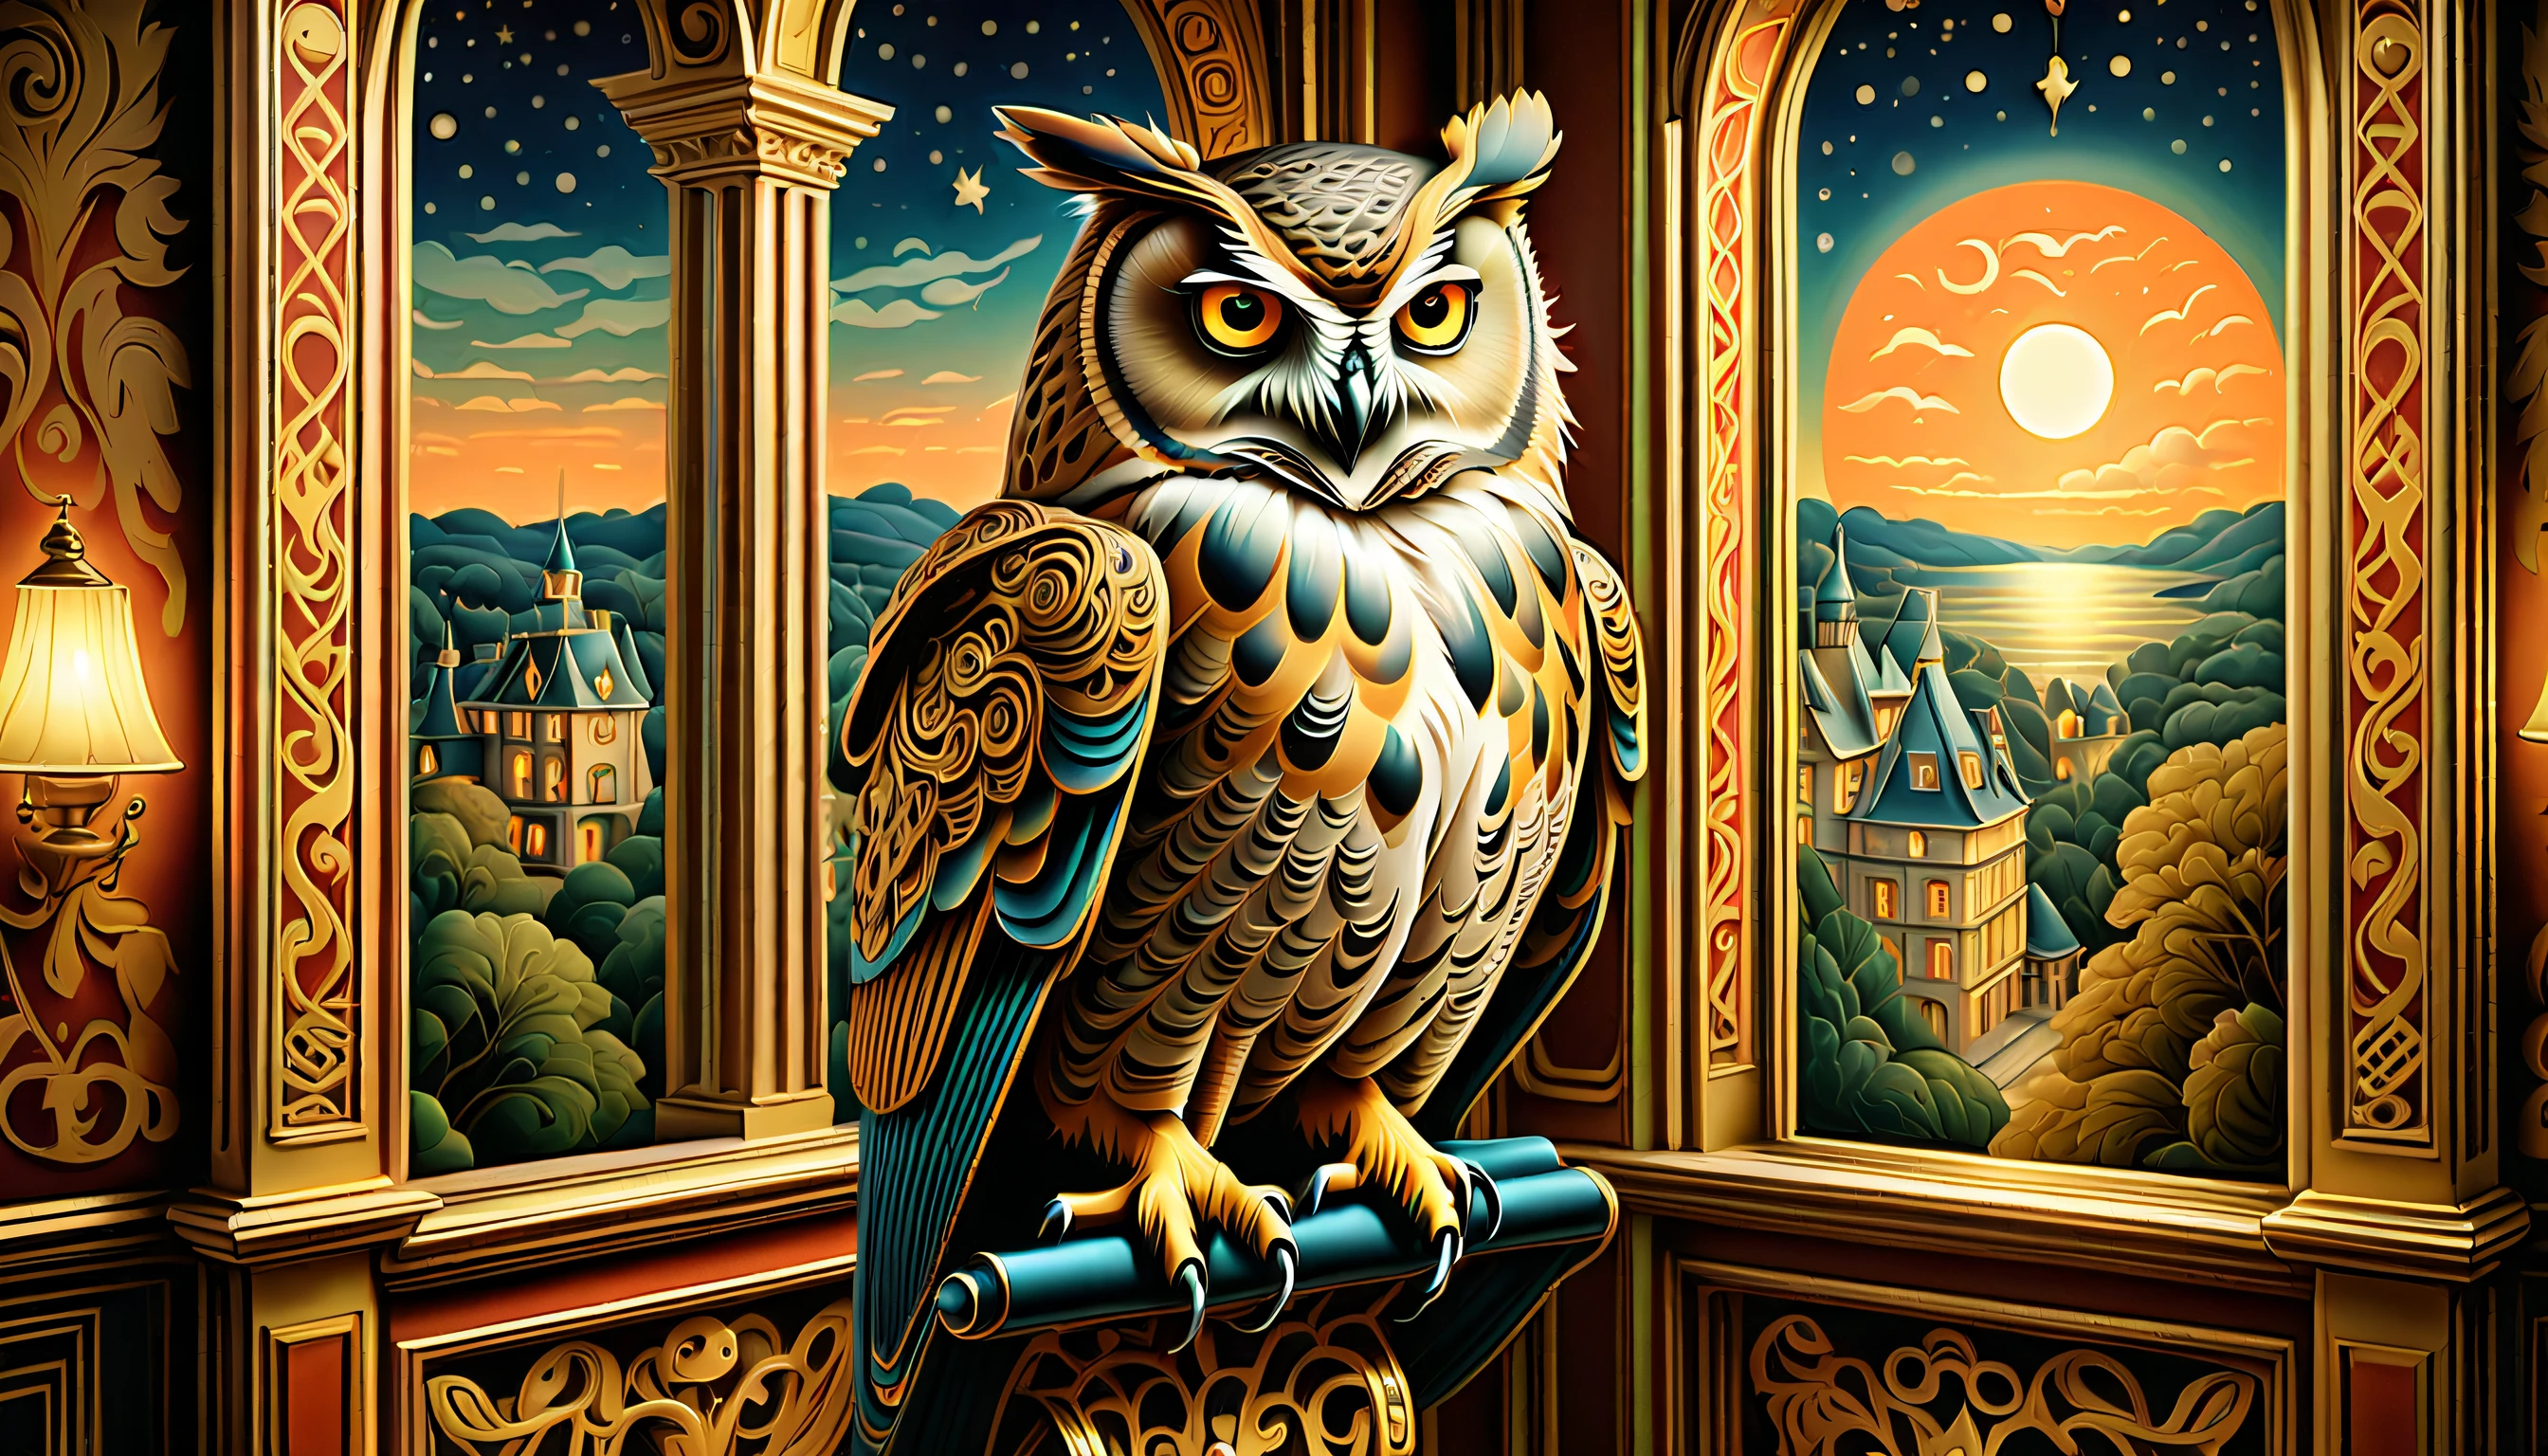 (((gentle butler with owl perched on his shoulder of intricate detail illustration:))), ((star night outside the window of strolls down the grand hallway:1.1)), Inside the mansion of a high-ranking aristocrat illustration, In the midst of a lunar eclipse, the soft light from the lamps illuminates his path, peaceful and beautiful moment, warm and inviting atmosphere, (((stunning rich colored oil painting:1.3))), (((ultimate quality:1.3))), (((intricate insane detail:1.3))), (((extremely intricate details:1.3))), high resolution,